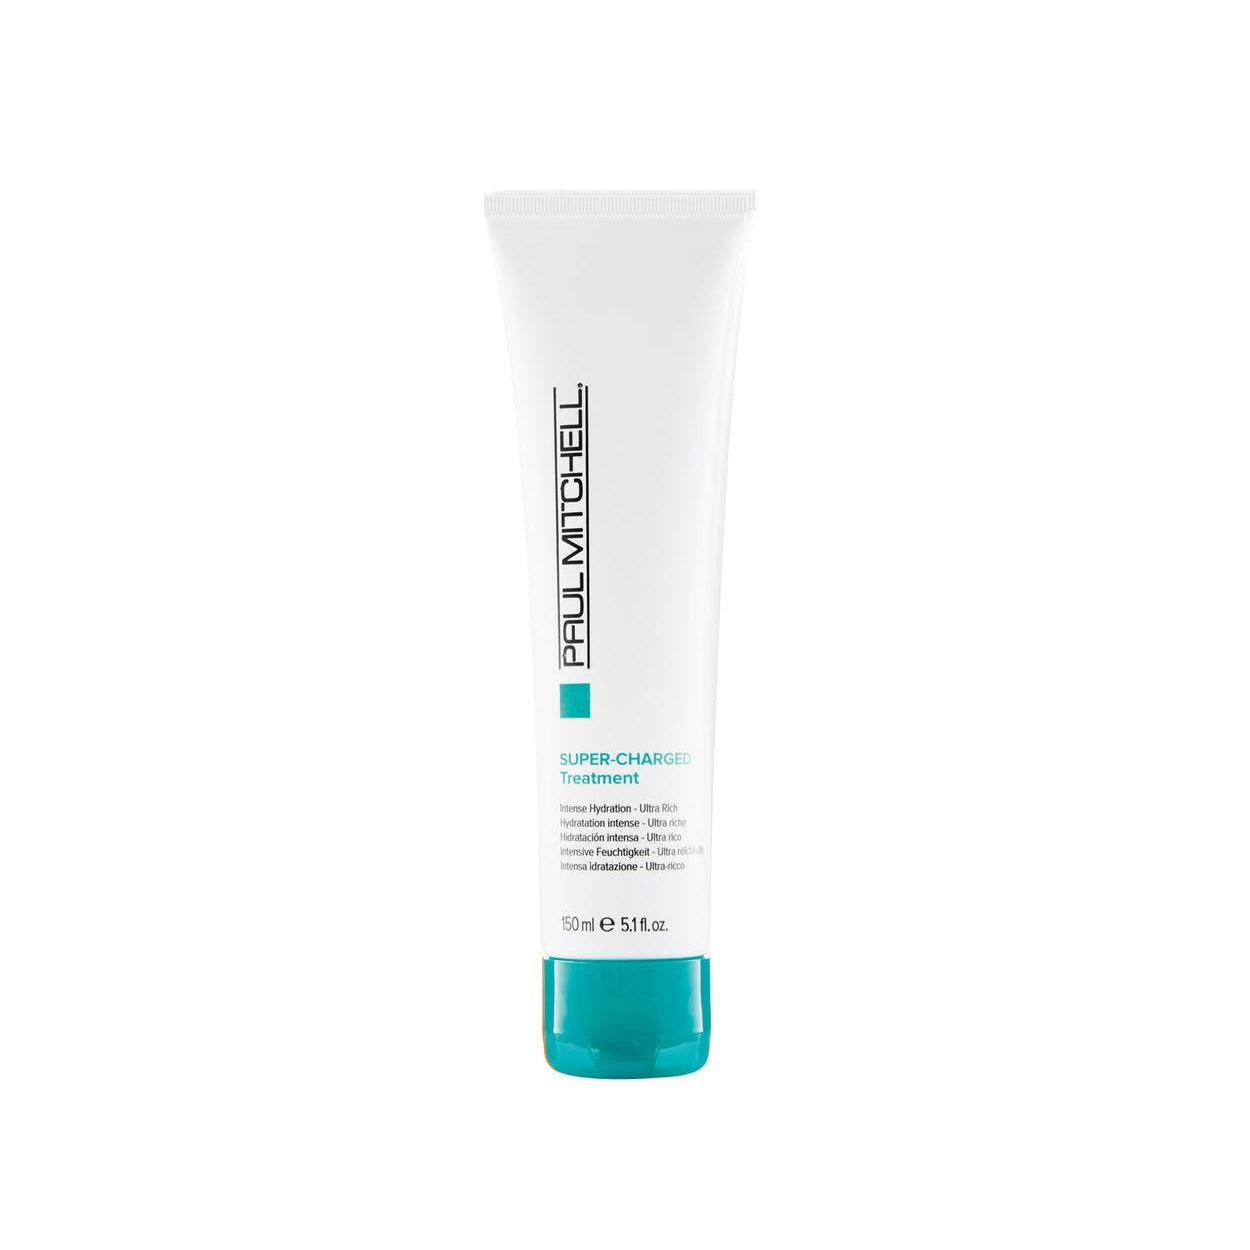 Paul Mitchell super charged treatment 150ml